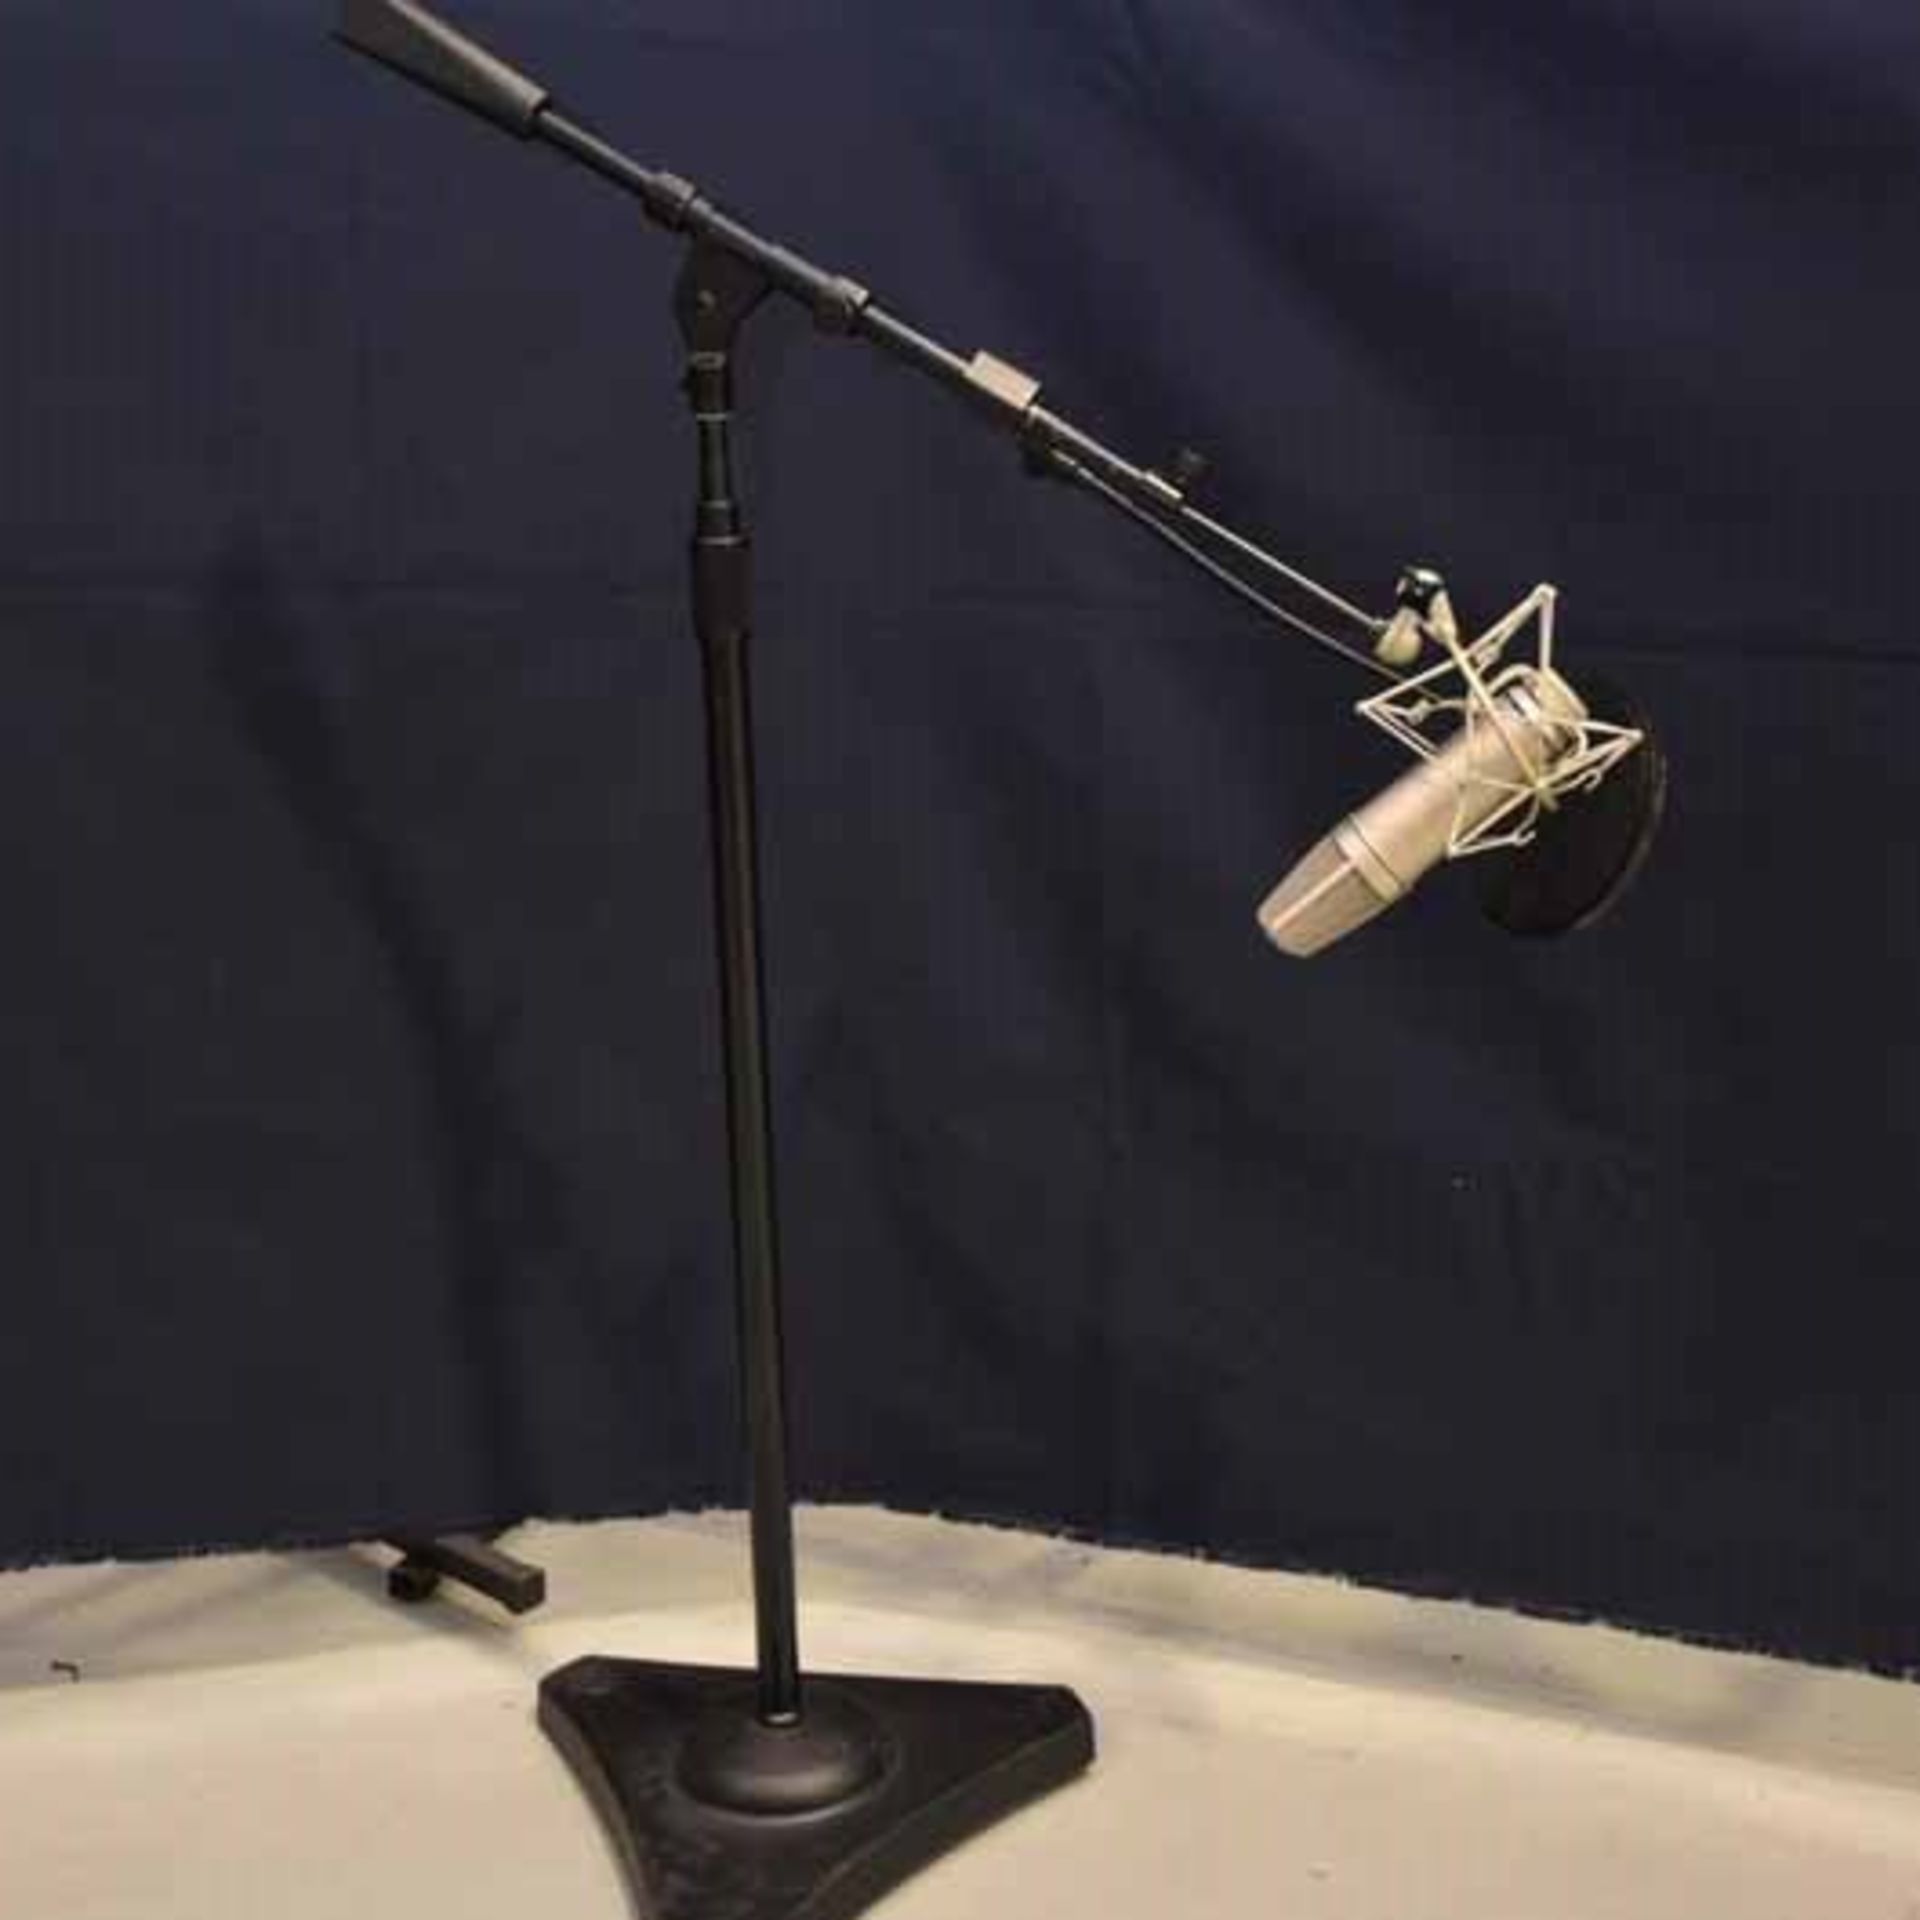 1 - Neumann Type U-87AIP48 microphone on a Atlas Sound MS25 pro mic stand (black) w/windscreen - Image 2 of 2